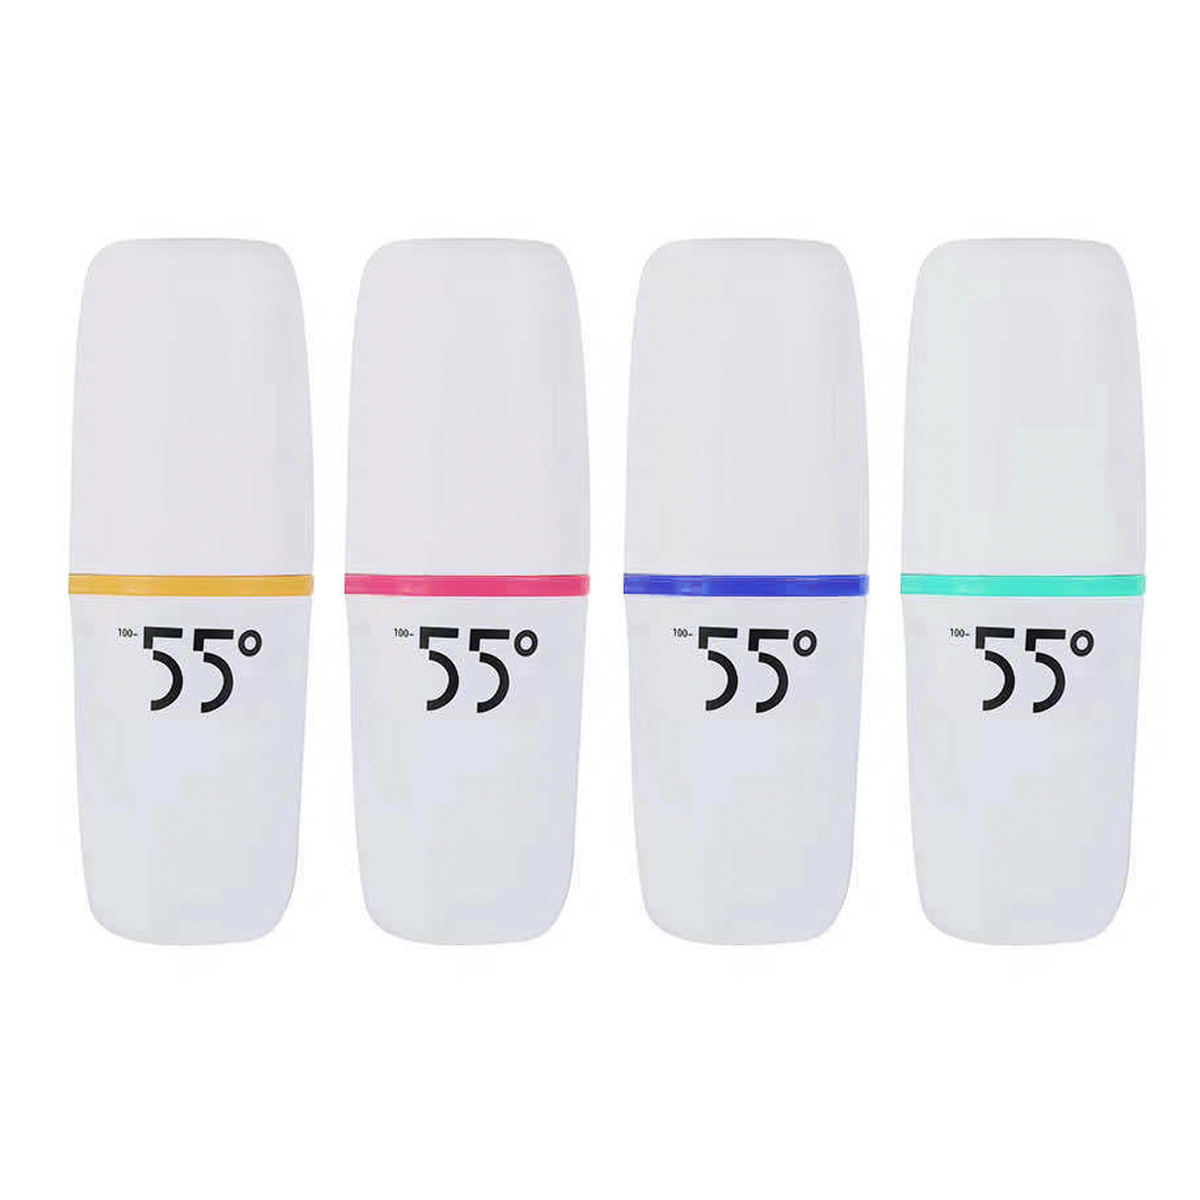 55 Degree Smart Thermal flask